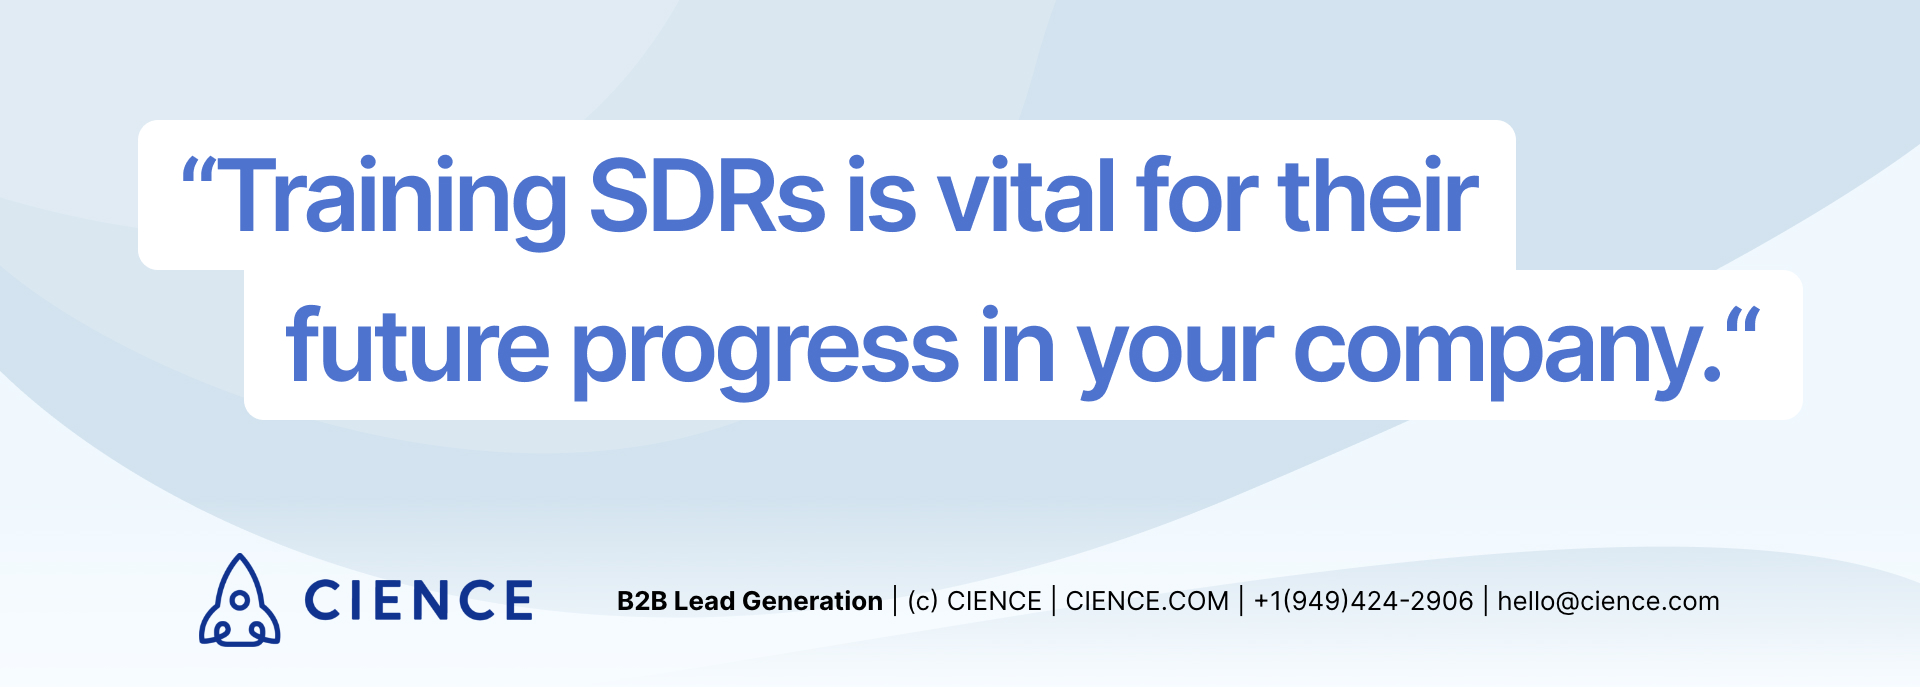 Training SDRs is vital for their future progress in your company